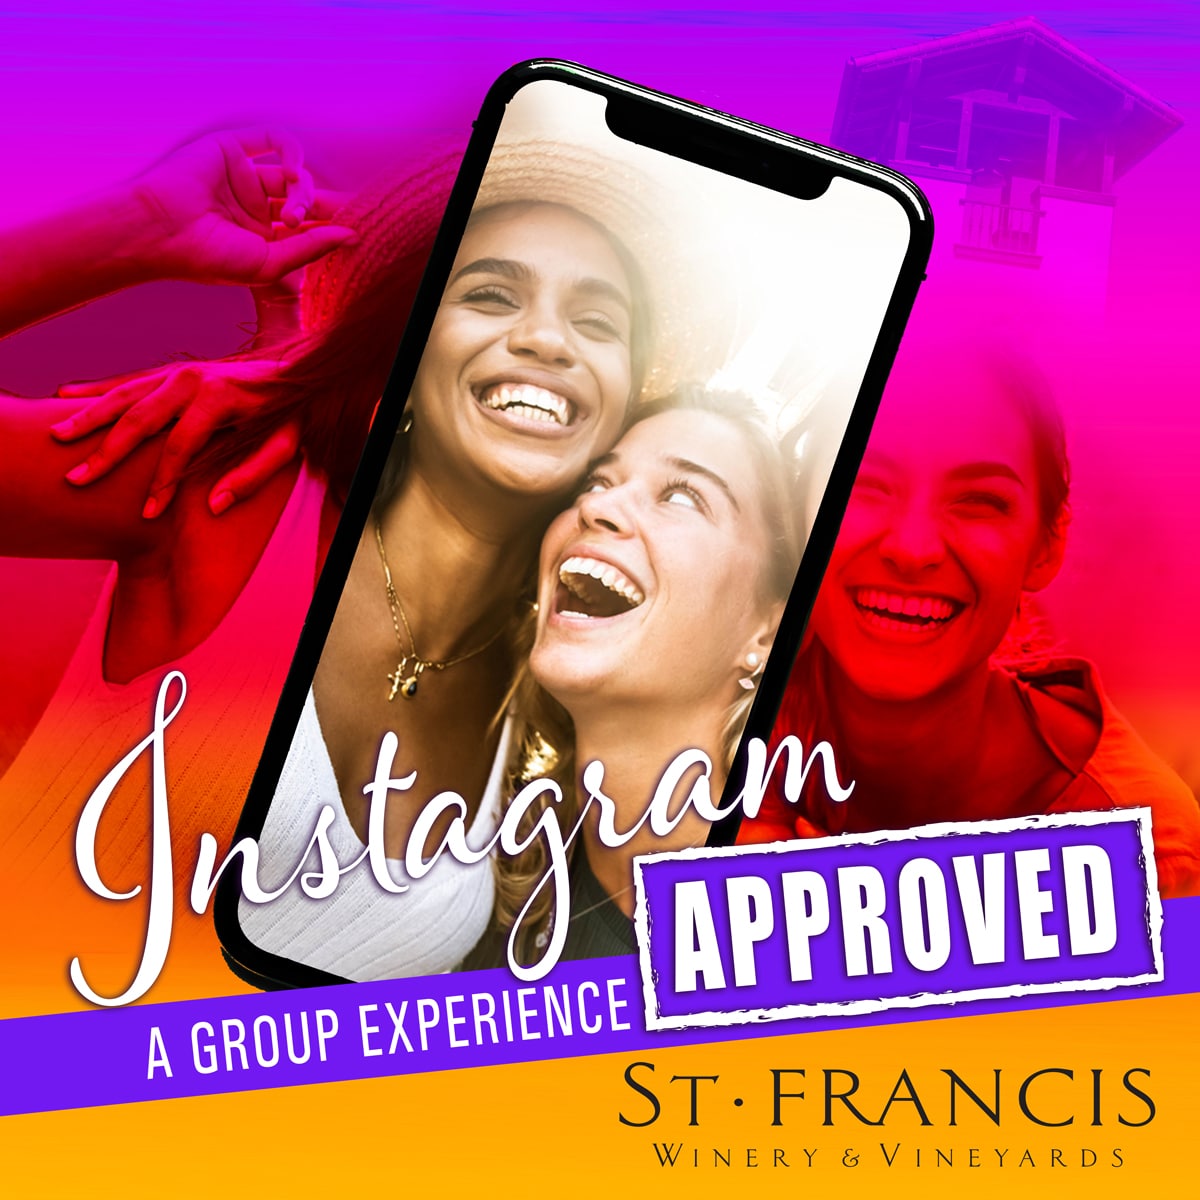 'instagram Approved' from St. Francis Winery & Vineyards